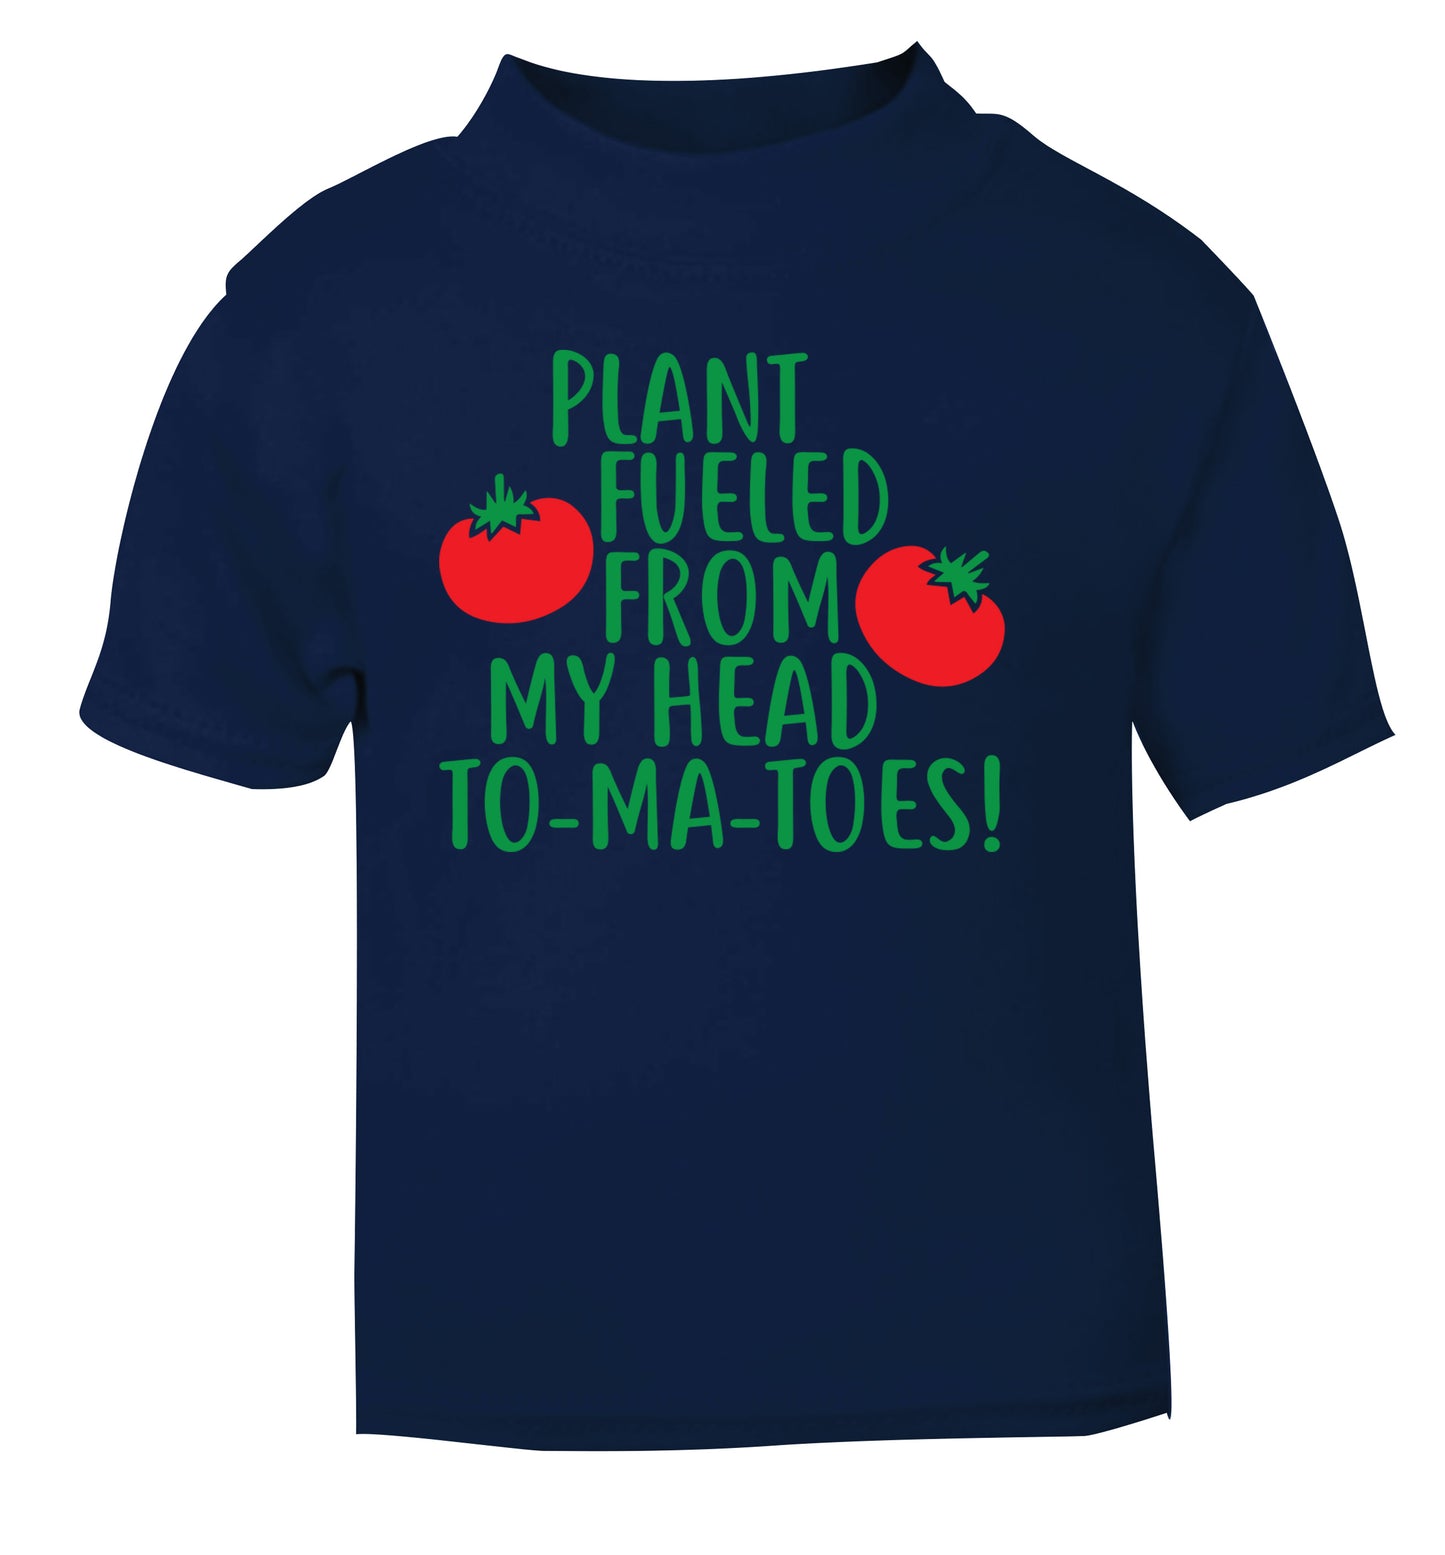 Plant fueled from my head to-ma-toes navy Baby Toddler Tshirt 2 Years